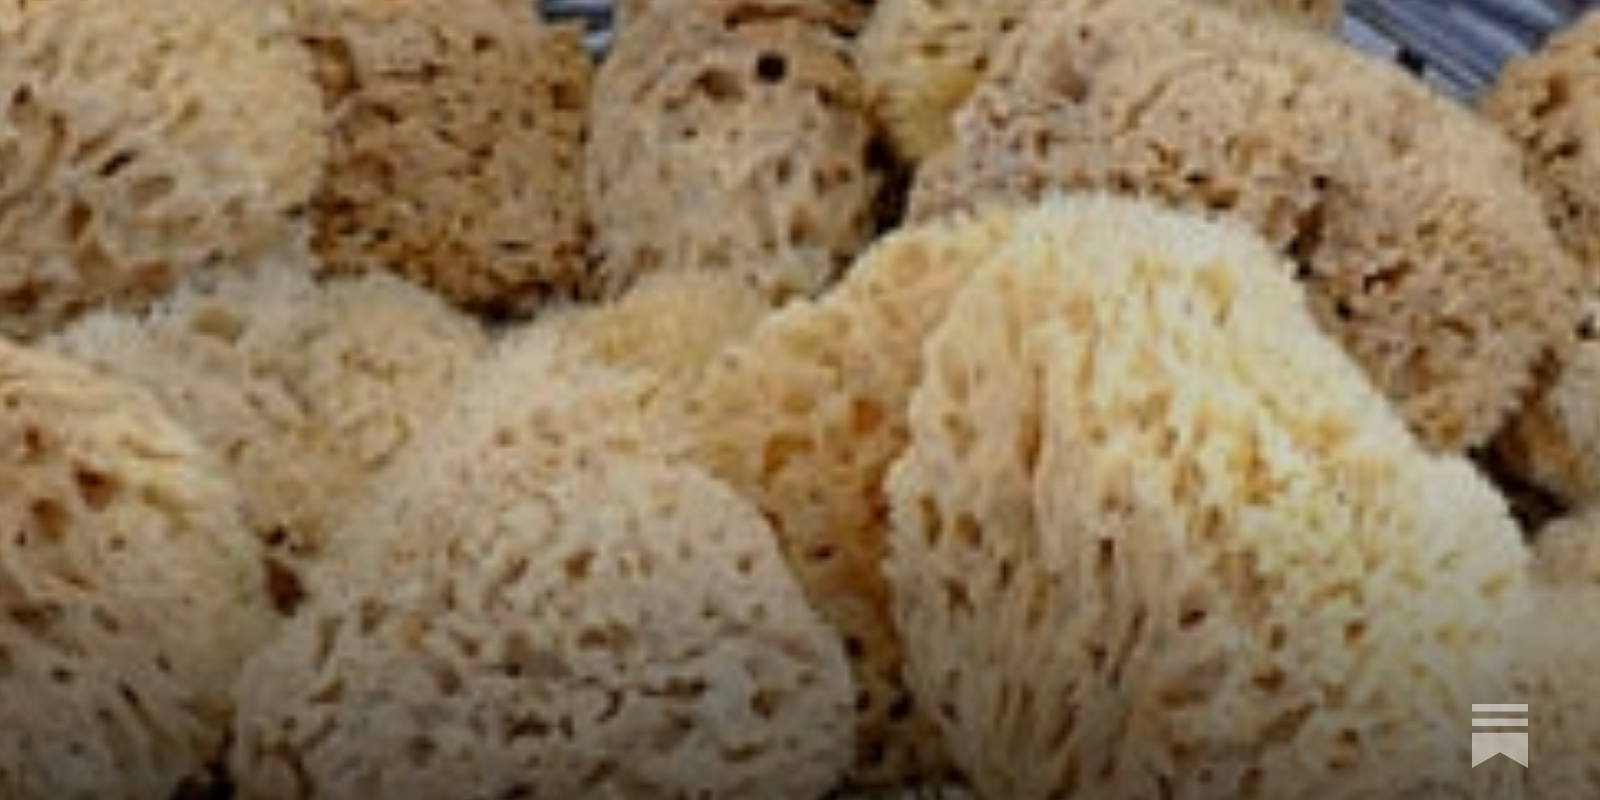 Natural Sea Sponges Are Not A Safe Alternative To Tampons, Science